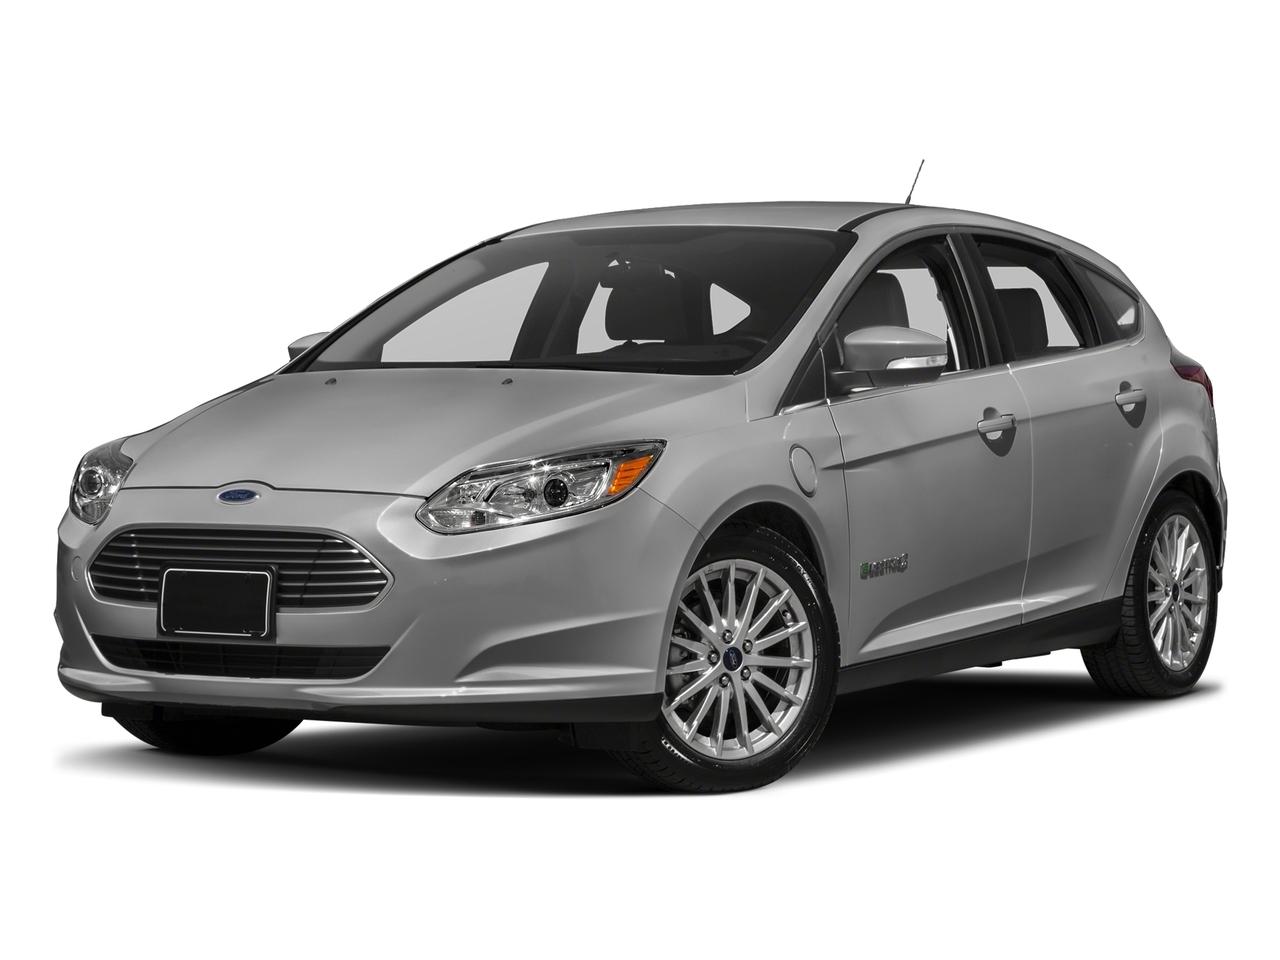 2017 Ford Focus Vehicle Photo in ELYRIA, OH 44035-6349